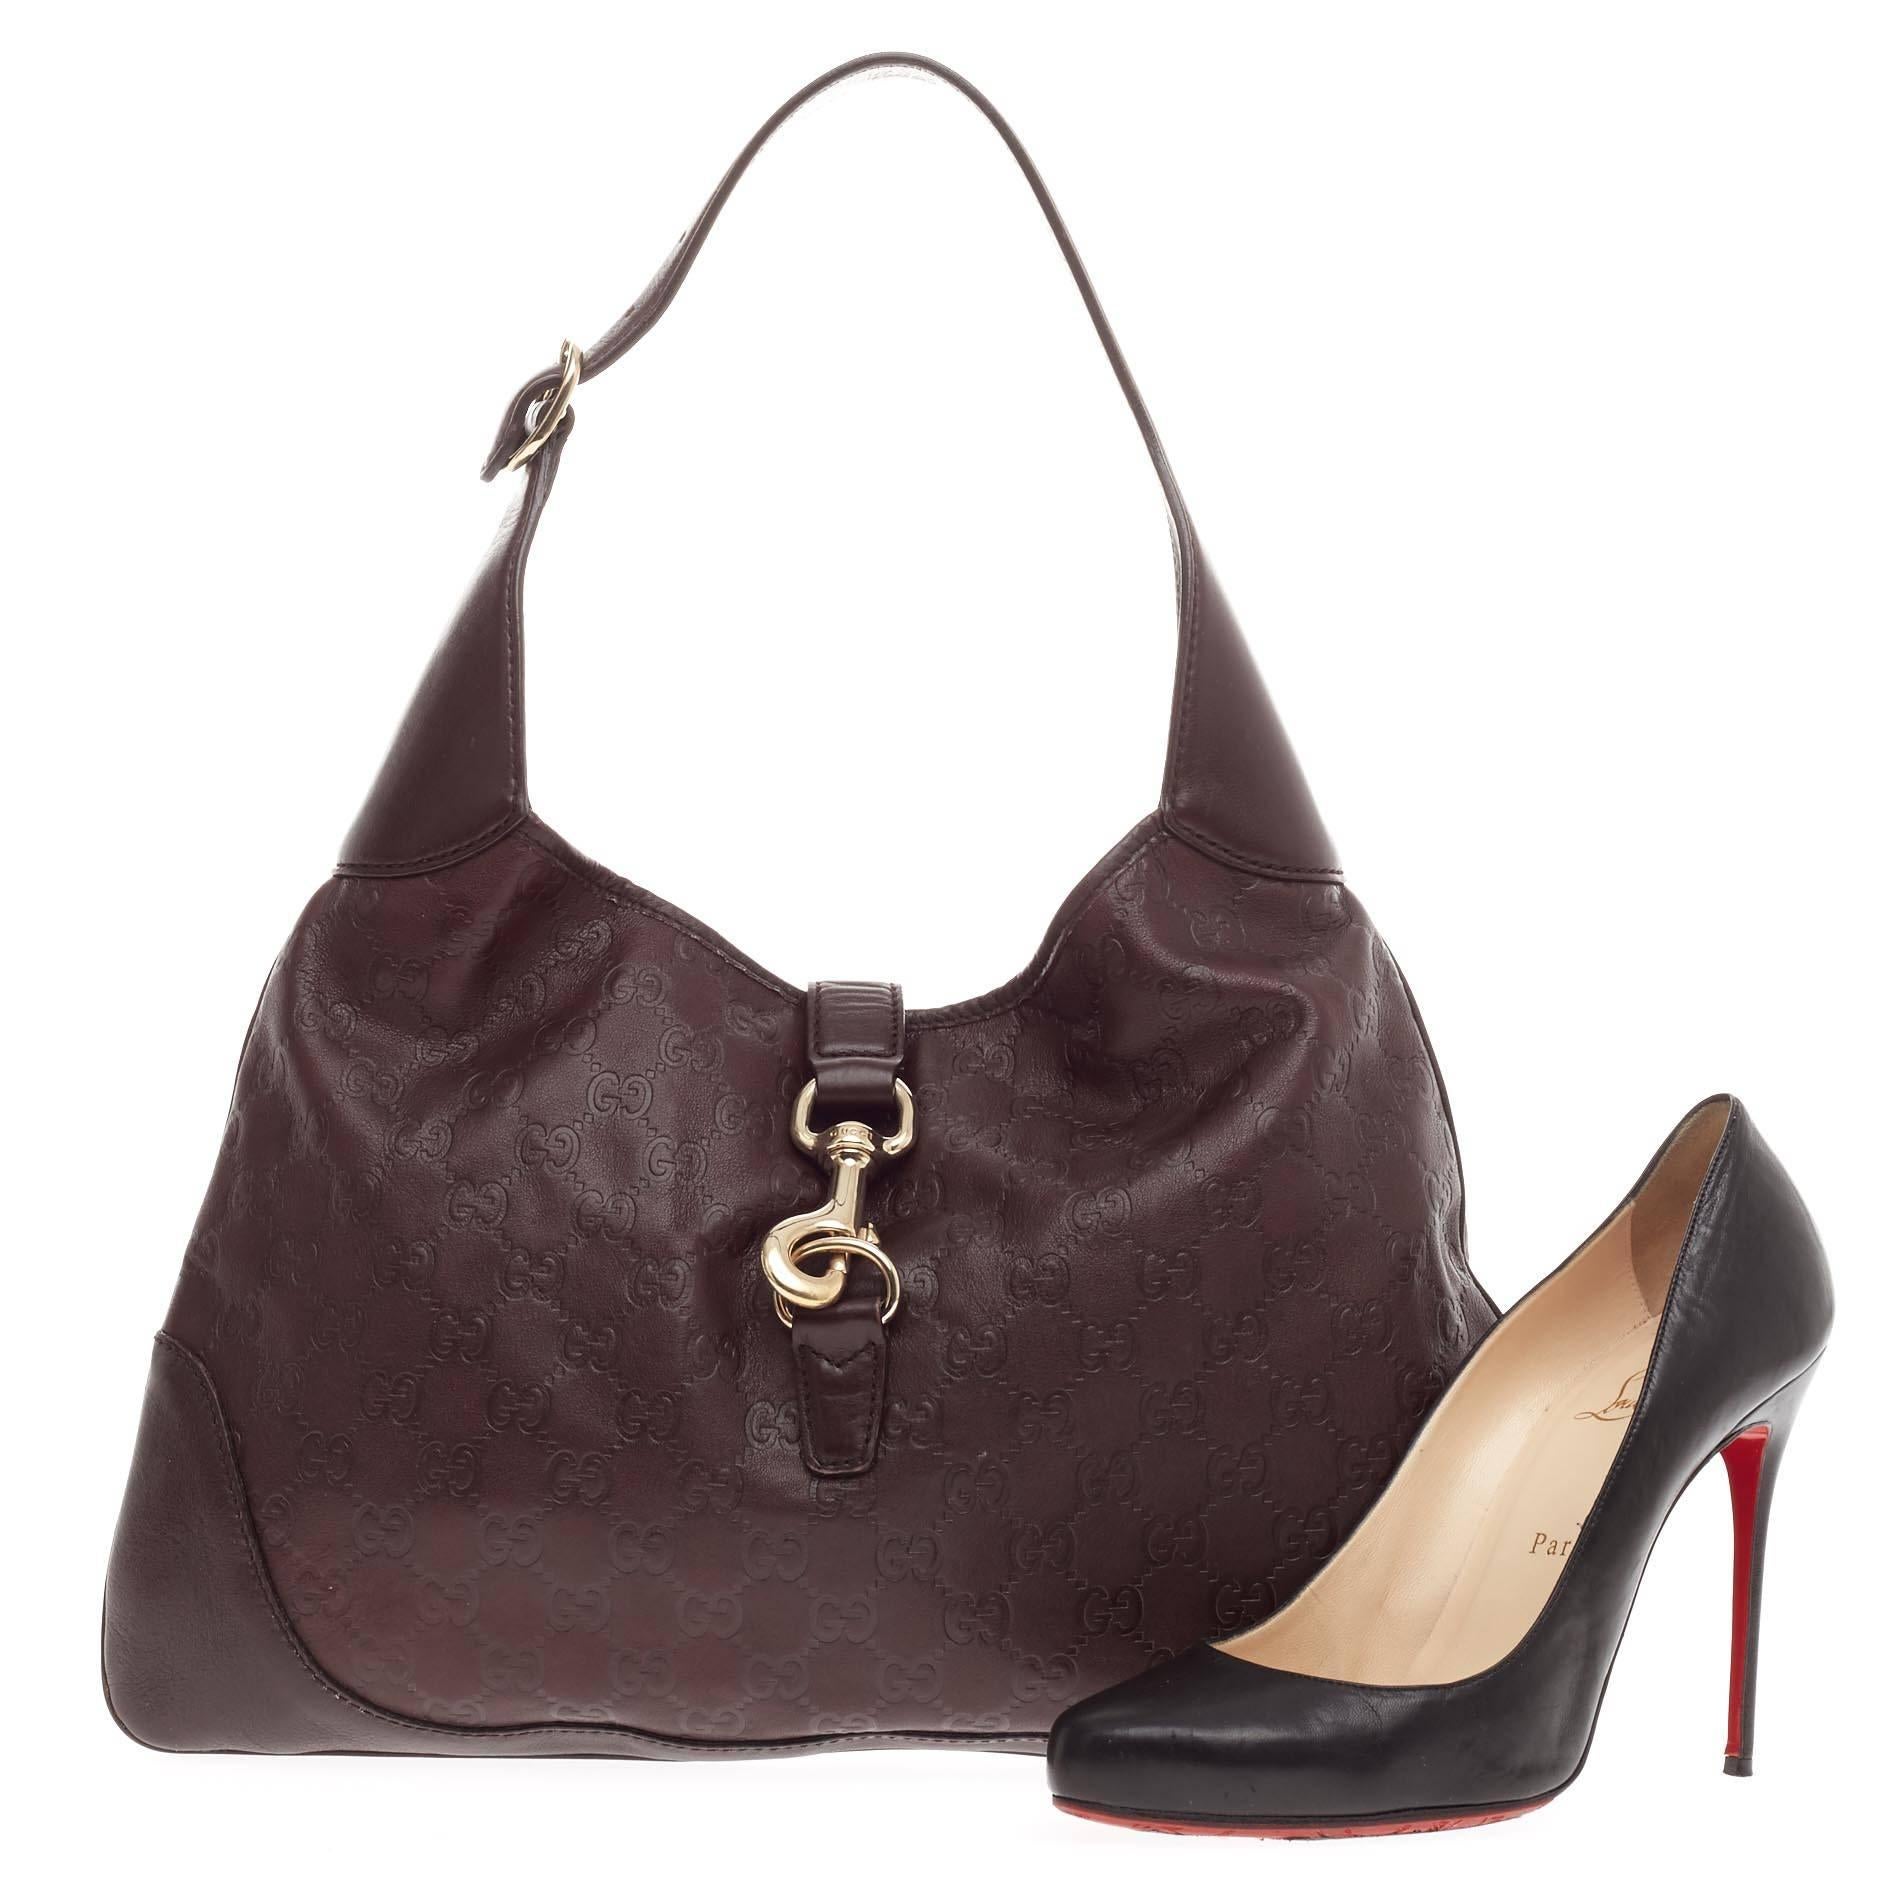 This authentic Gucci Jackie O Guccissima Leather Medium is a must-have luxurious hobo fit for the modern woman. Constructed from dark brown guccissima leather, this iconic hobo features an adjustable shoulder leather strap, and gold-tone hardware